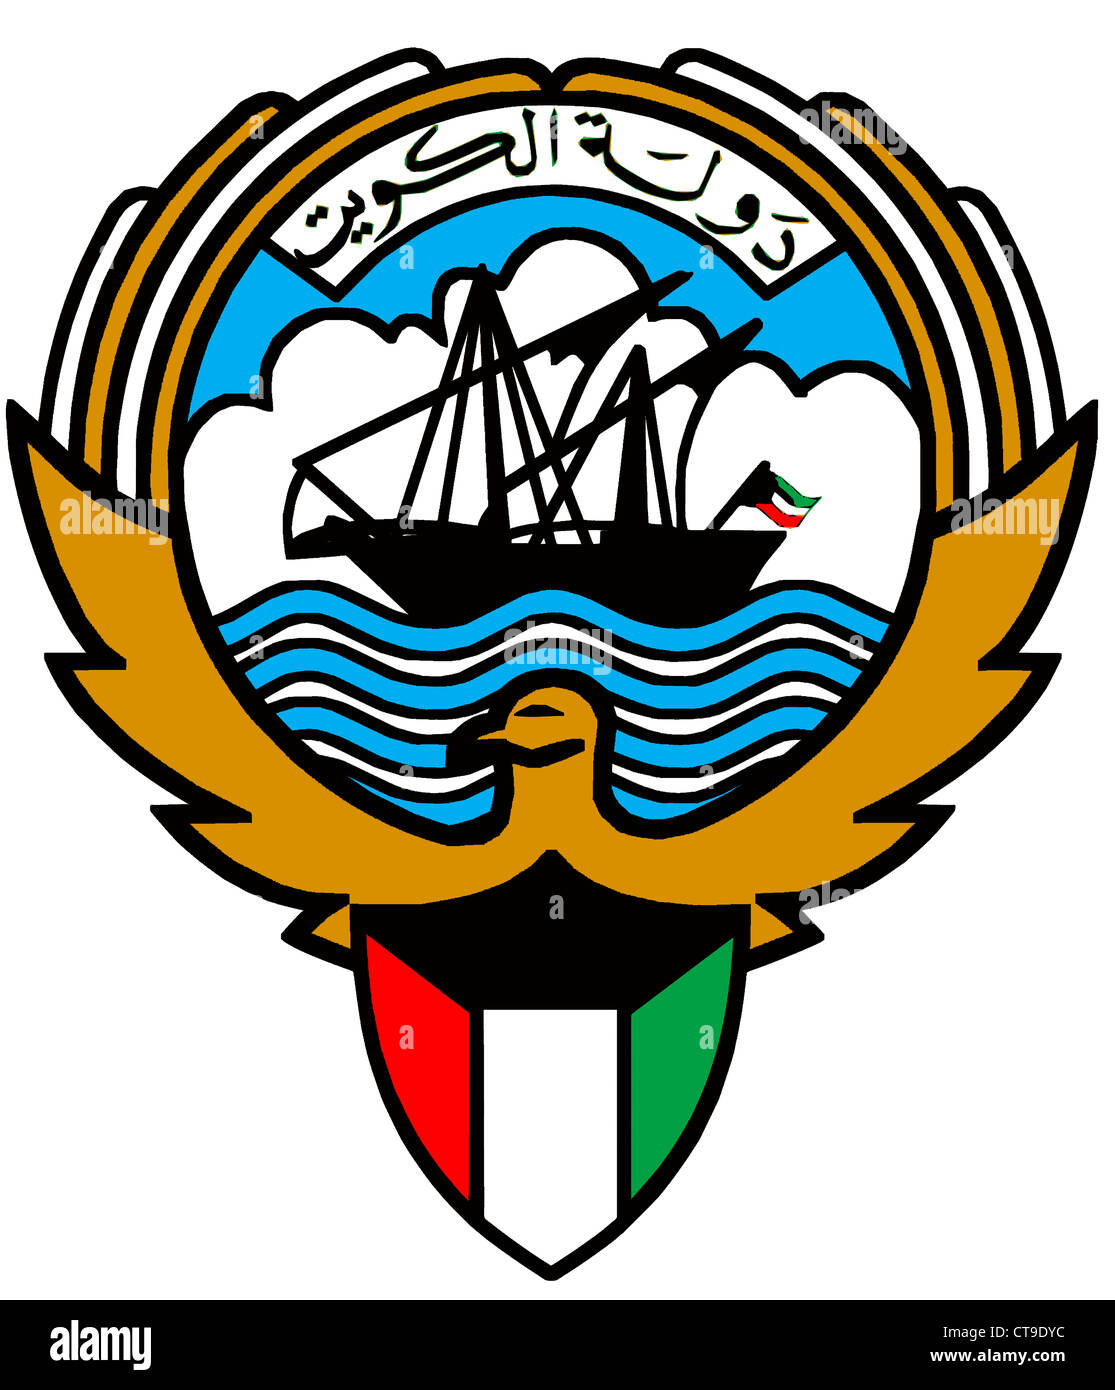 Coat of arms of the Emirate Kuwait. Stock Photo